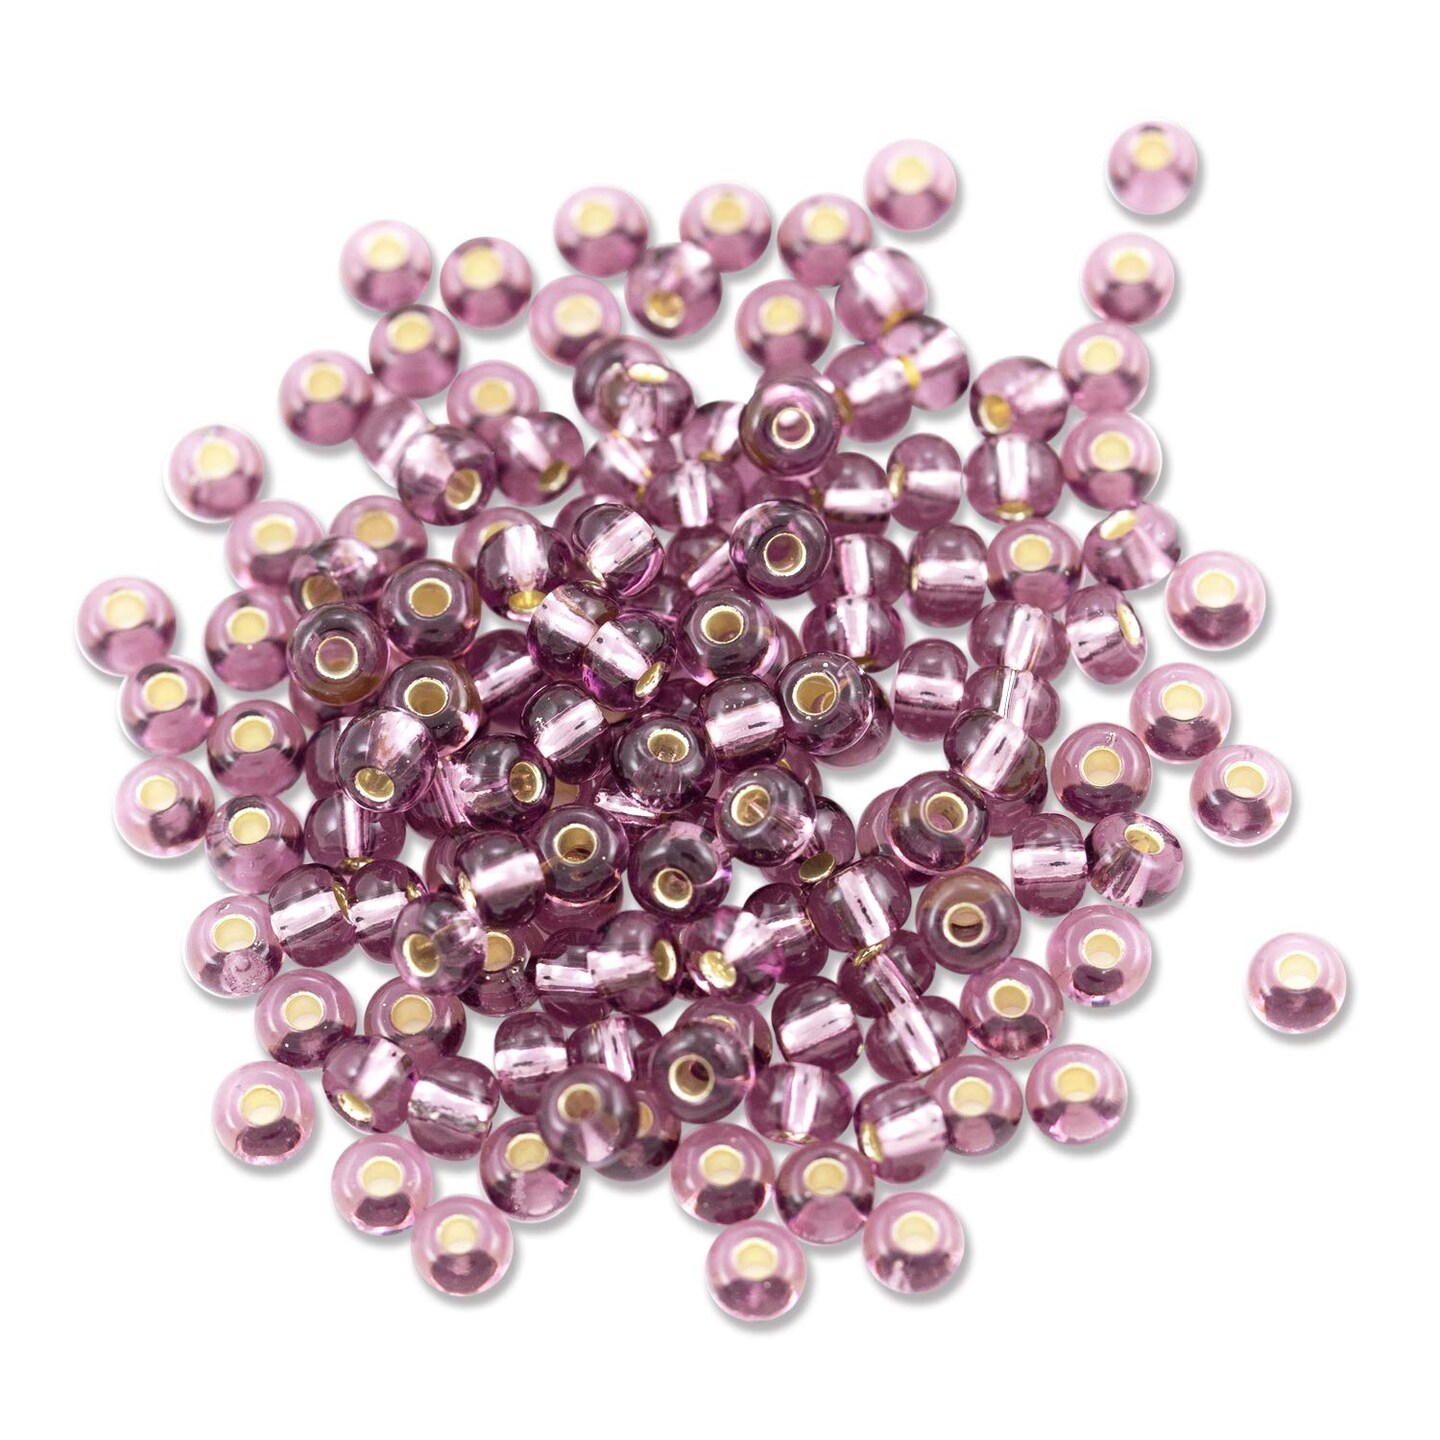 Czech Seed Bead 6/0 (4mm) Beads Silver Lined Amethyst Beads